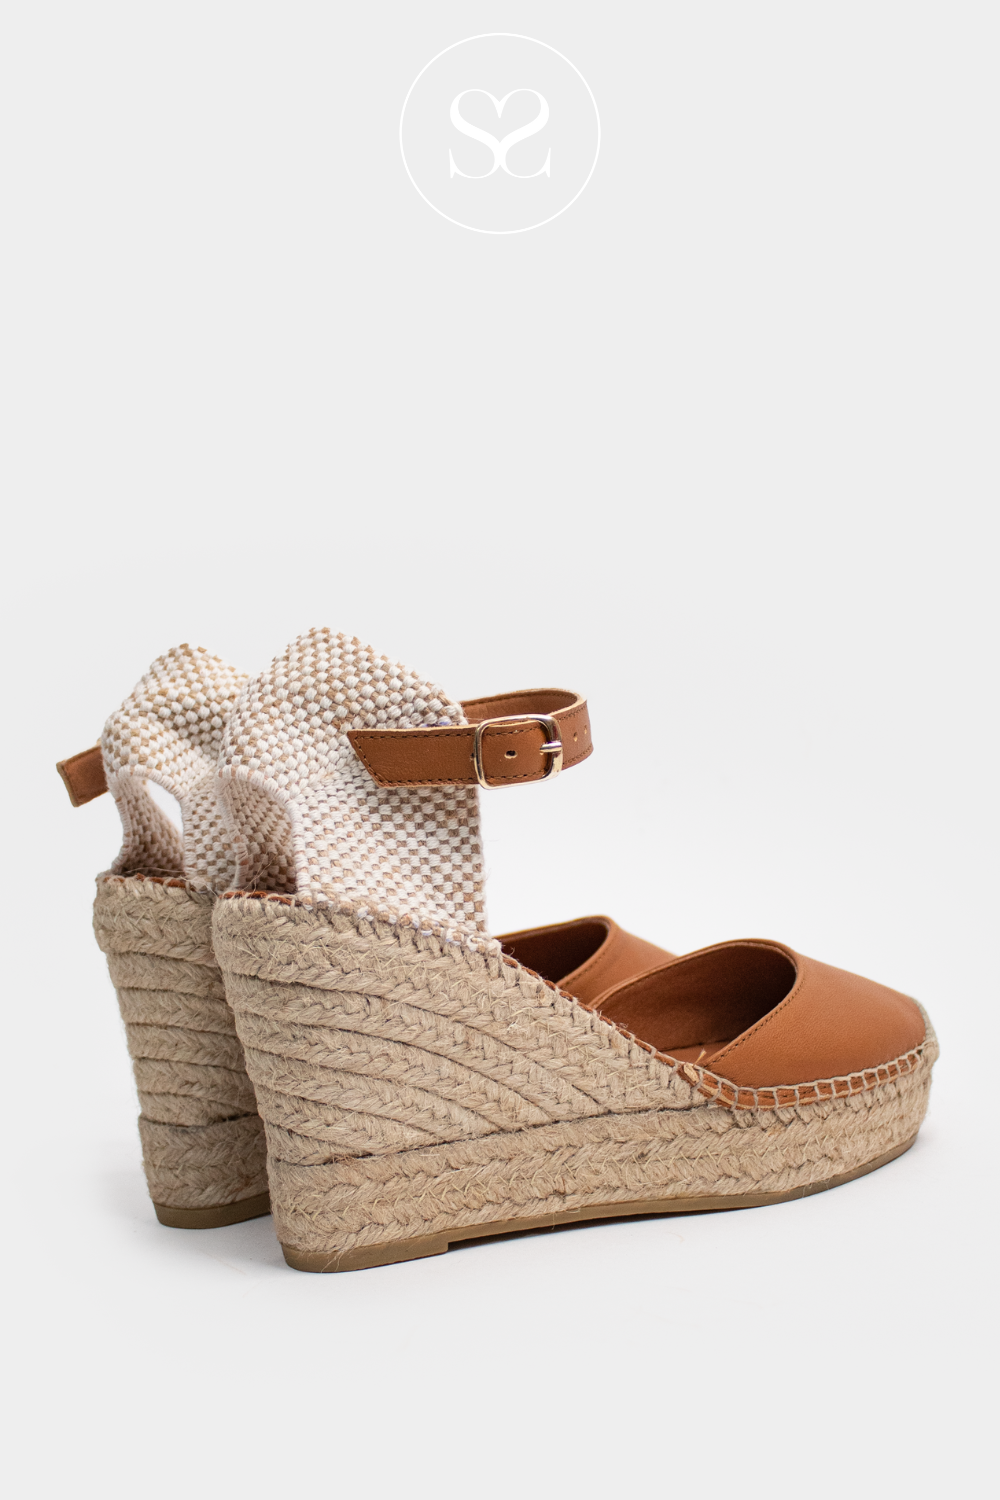 VIGUERA 1632 TAN WEDGE ESPADRILLE SANDALS WITH PLATFORM SOLE AND ANKLE STRAP